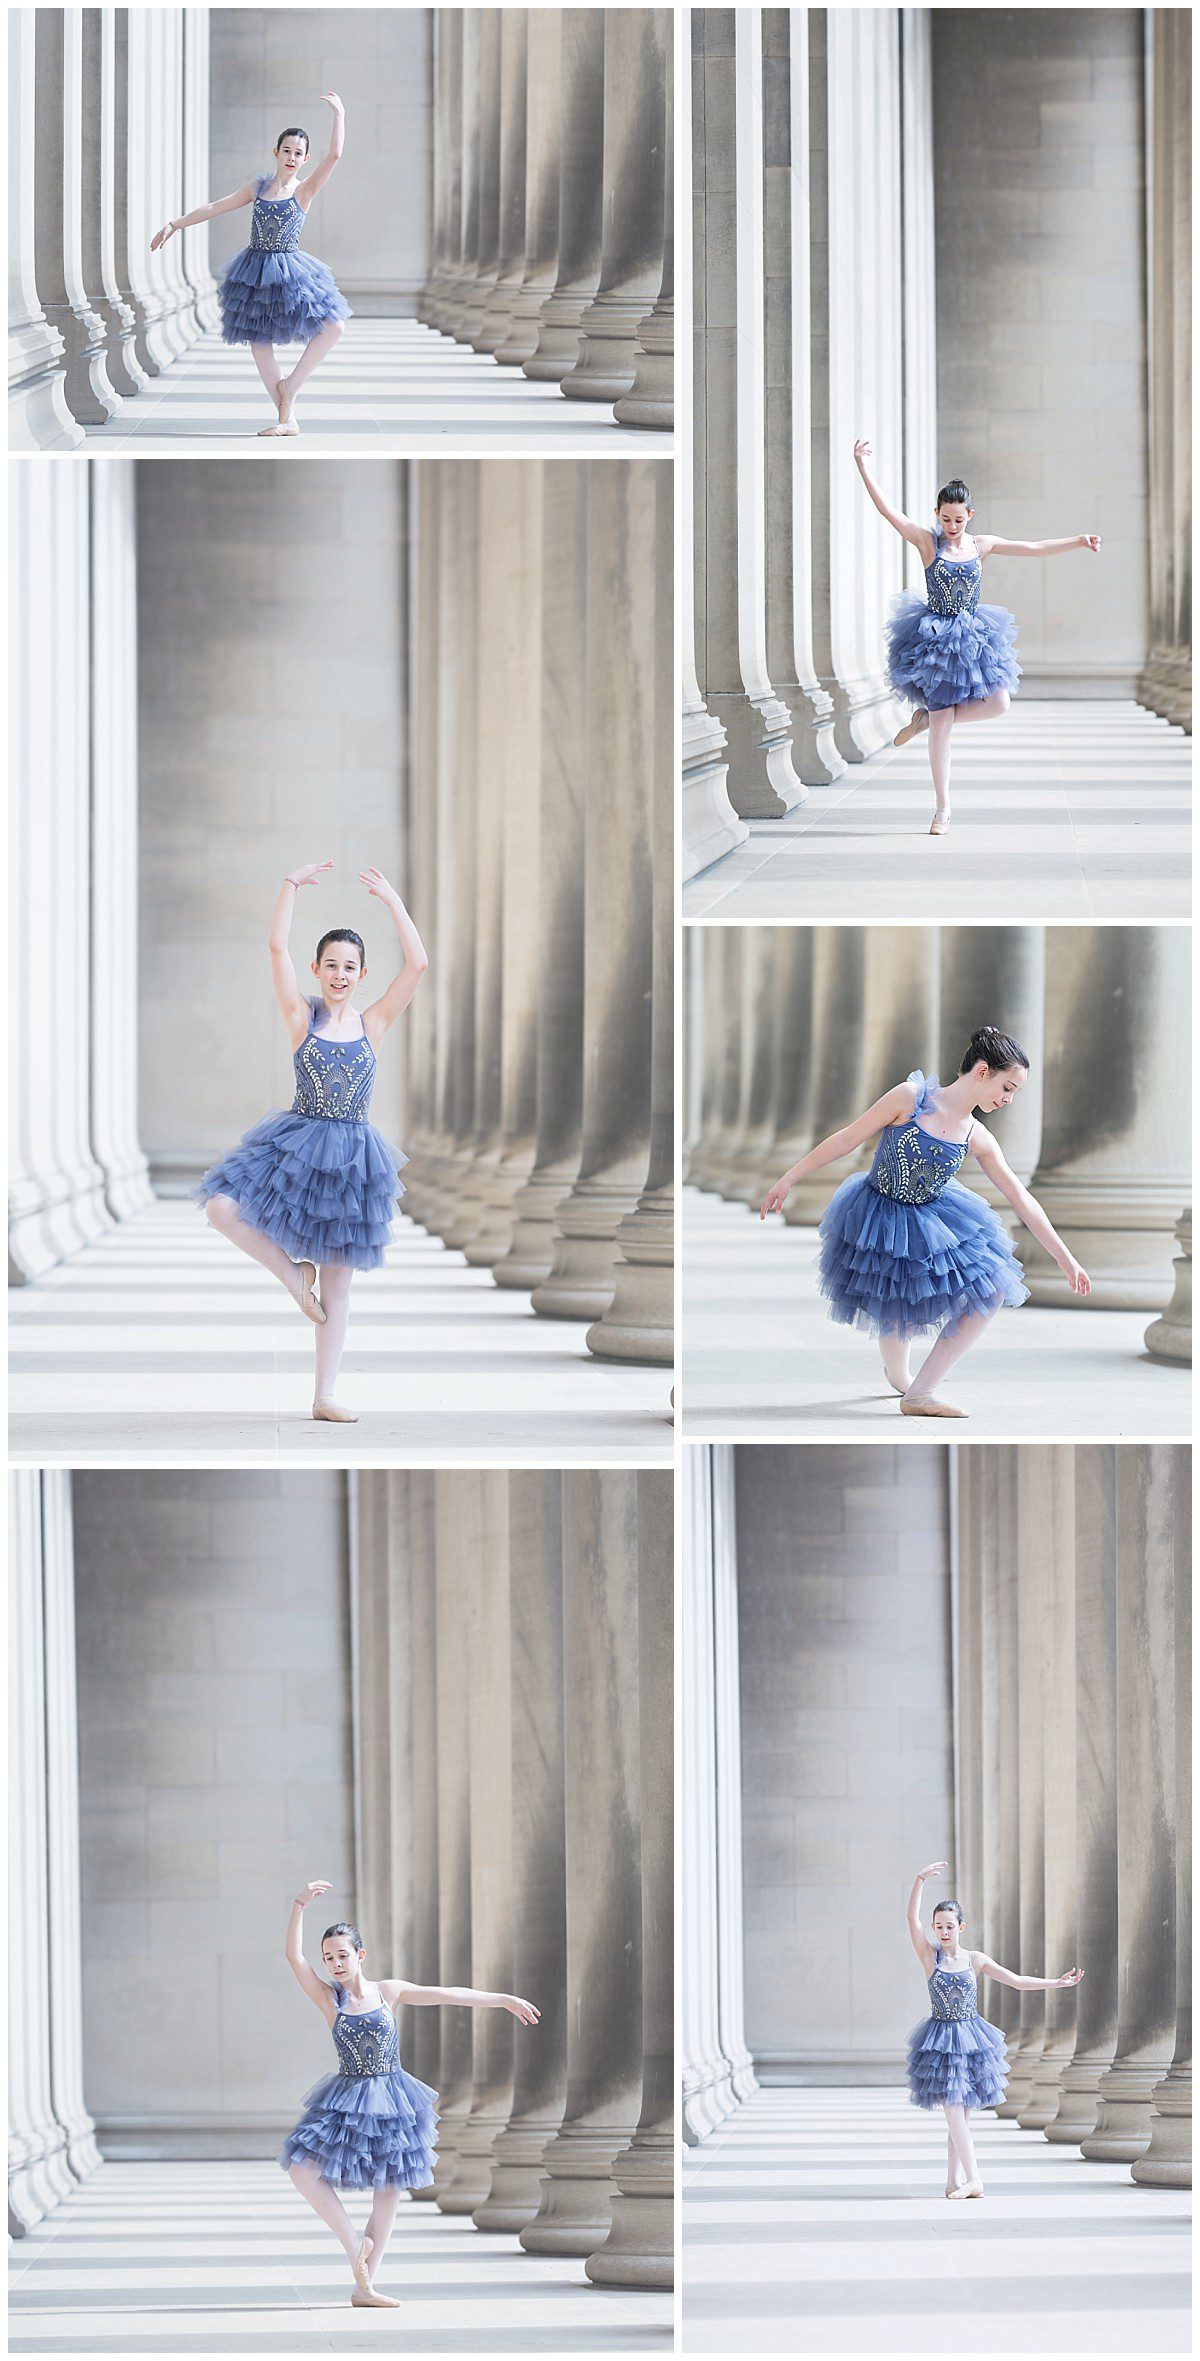 Images from creative dance portraits with Jodi Walsh Photography. this collage of images show a tween ballerina in blue dress dancing in stone hallway in Pittsburgh